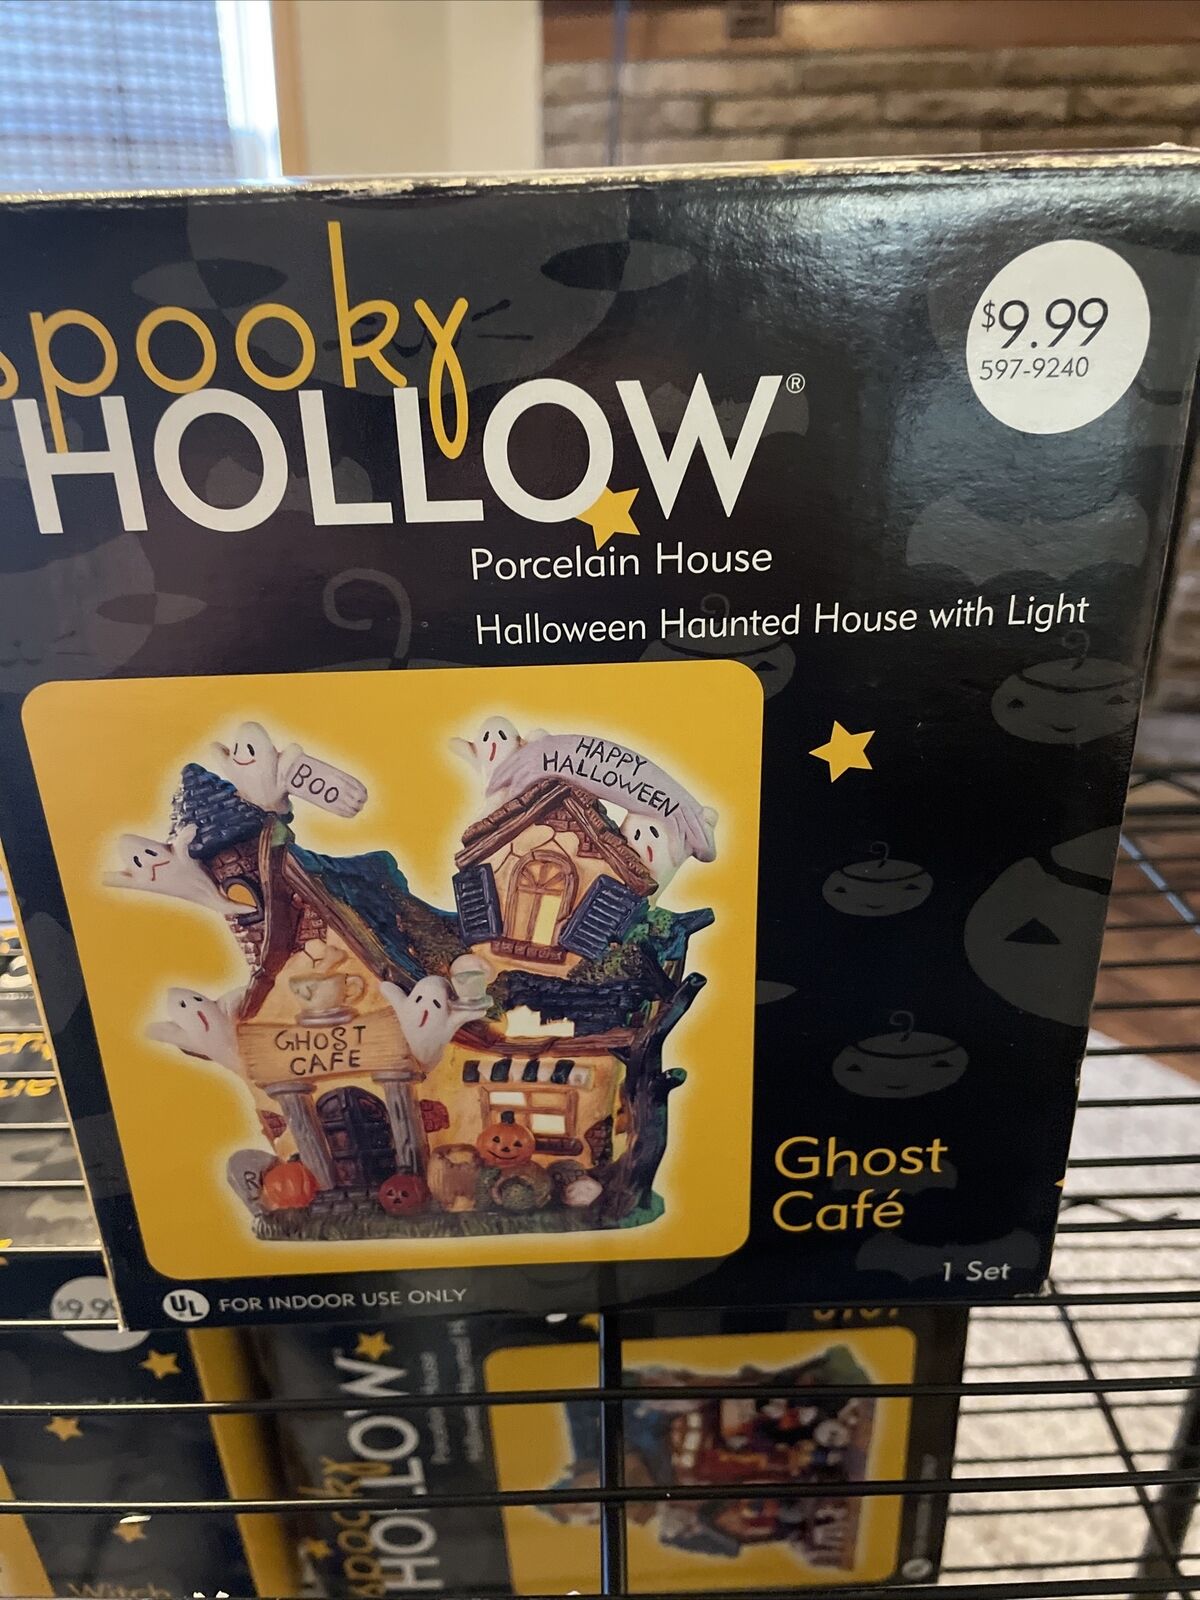 Spooky Hollow Ghost Cafe Halloween Porcelain House Collection